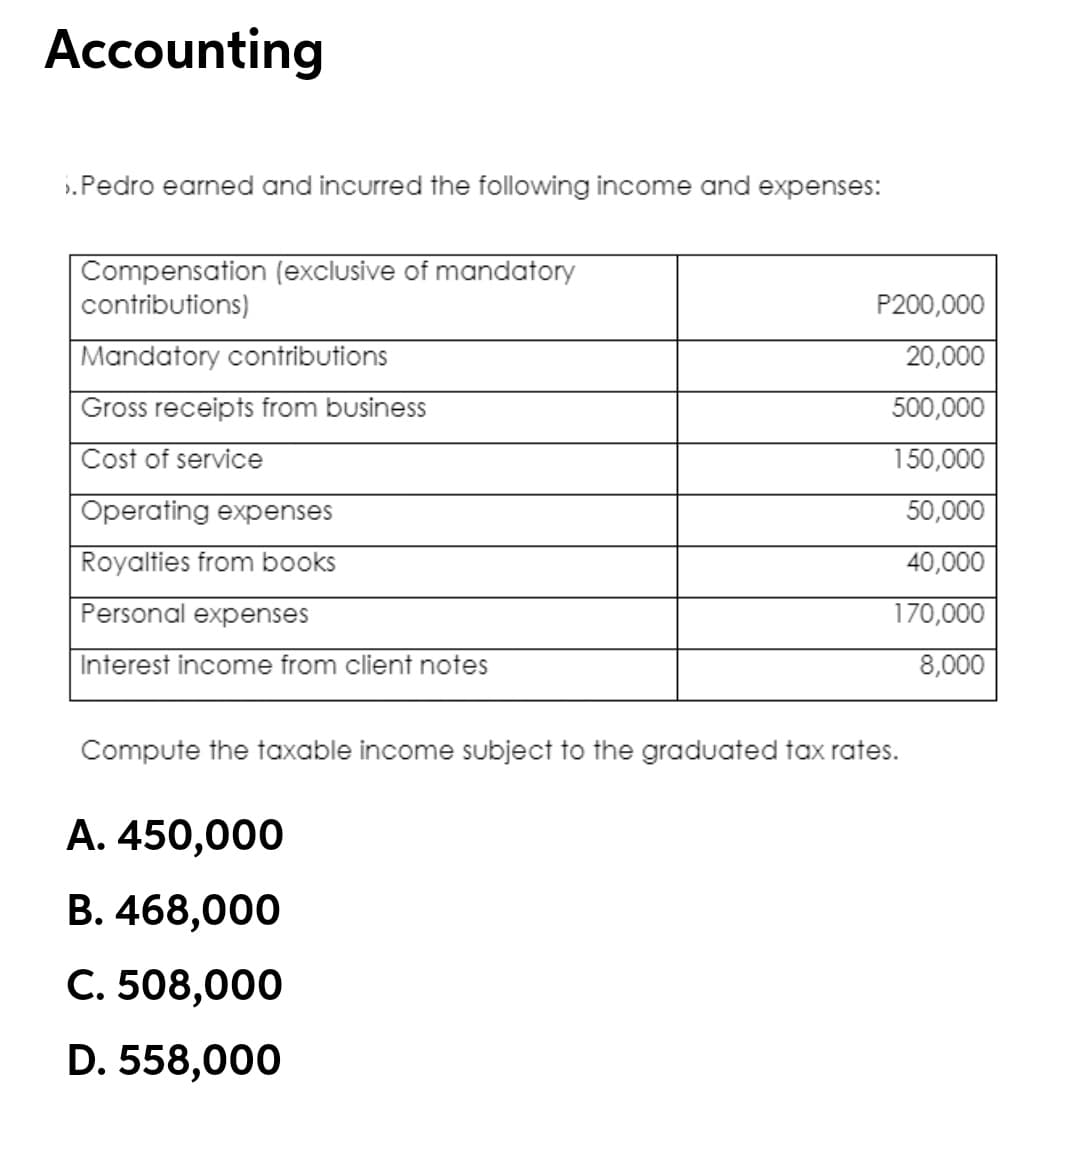 Accounting
.Pedro earned and incurred the following income and expenses:
Compensation (exclusive of mandatory
contributions)
P200,000
Mandatory contributions
20,000
Gross receipts from business
500,000
Cost of service
150,000
Operating expenses
50,000
Royalties from books
40,000
Personal expenses
170,000
Interest income from client notes
8,000
Compute the taxable income subject to the graduated tax rates.
А. 450,000
В. 468,000
C. 508,000
D. 558,000
